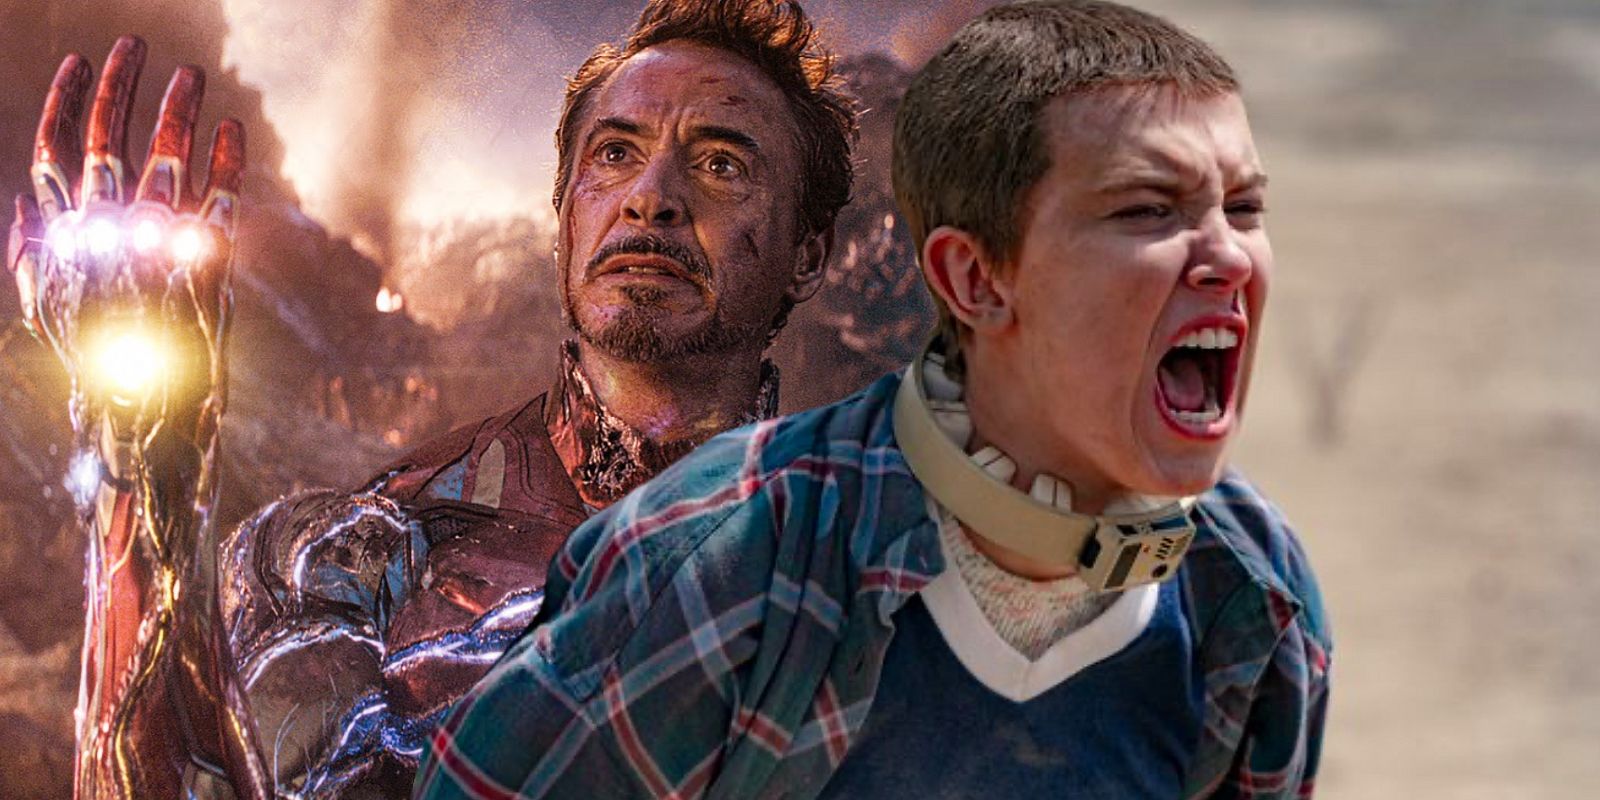 Robert Downey Jr as Iron Man and Millie Bobby Brown as Eleven